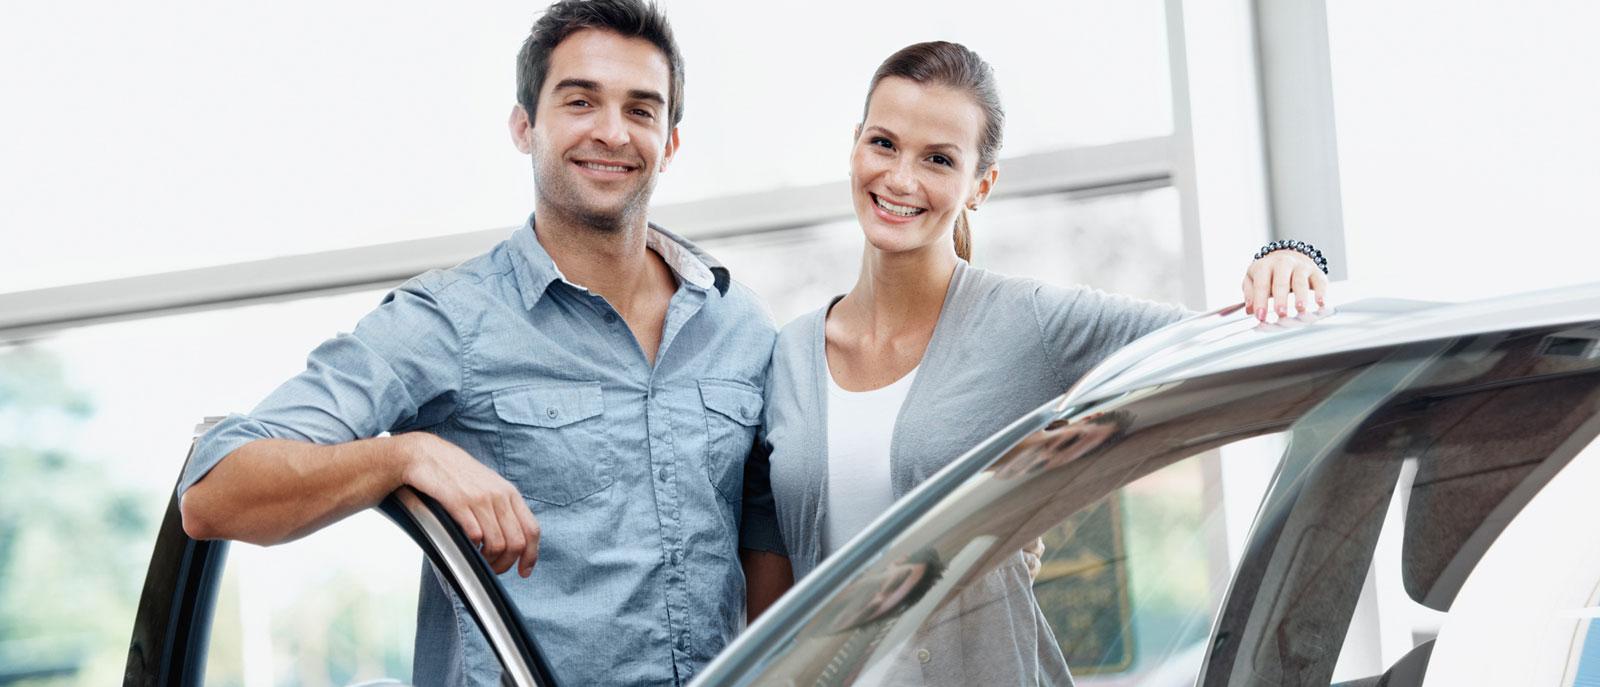 Smiling couple  in a dealership standing besides a new vehicle